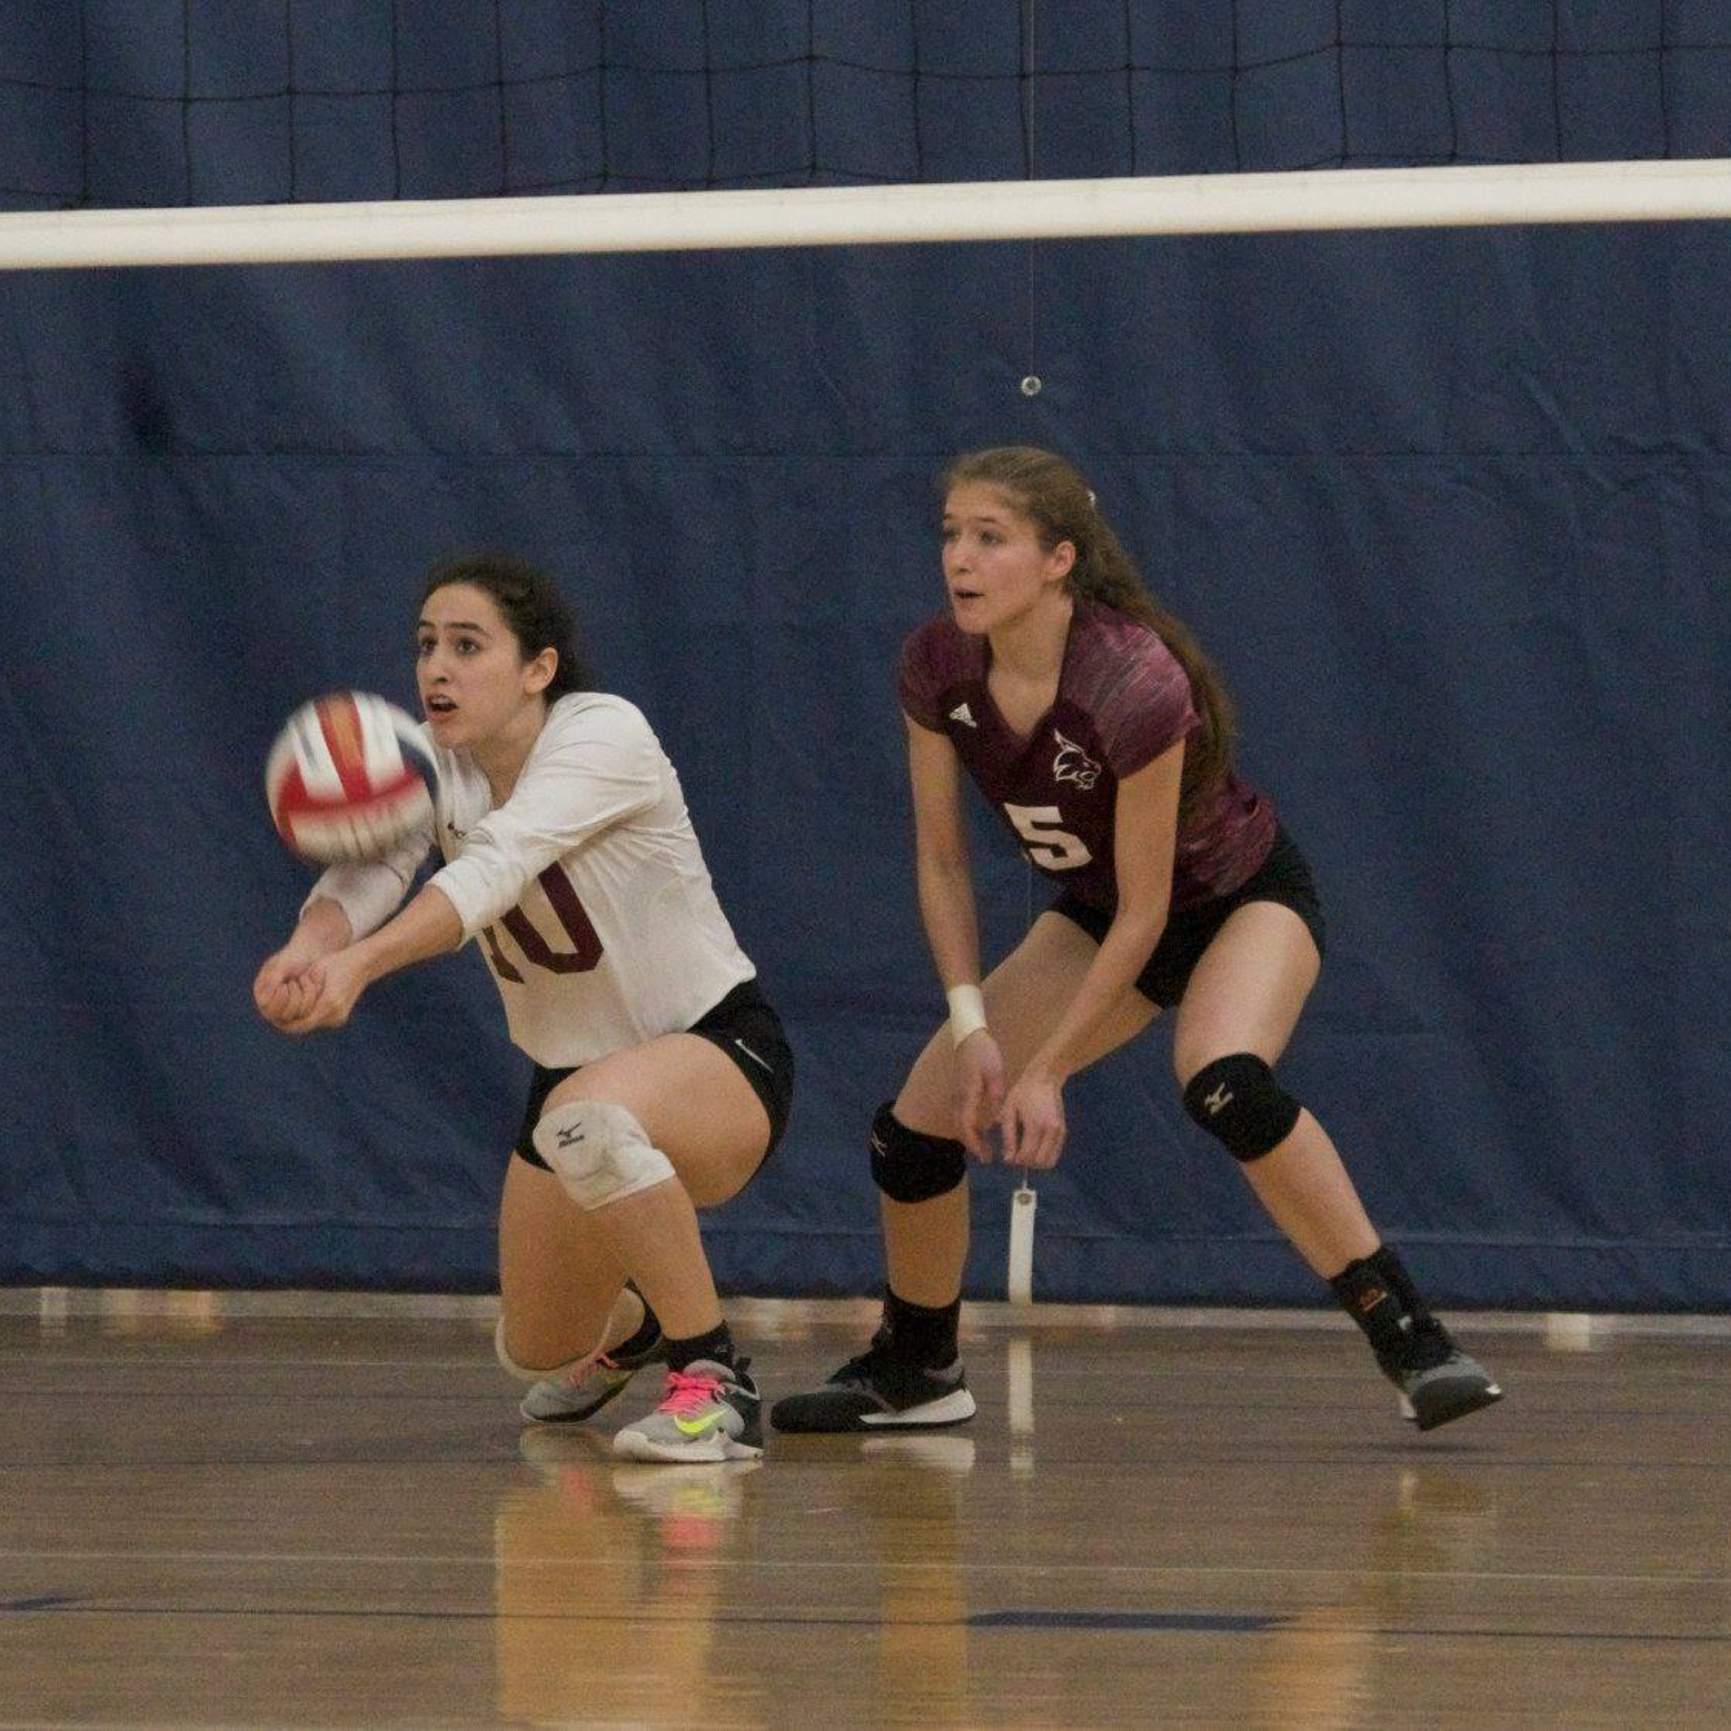 Women's Volleyball player bumps ball up from one knee on court